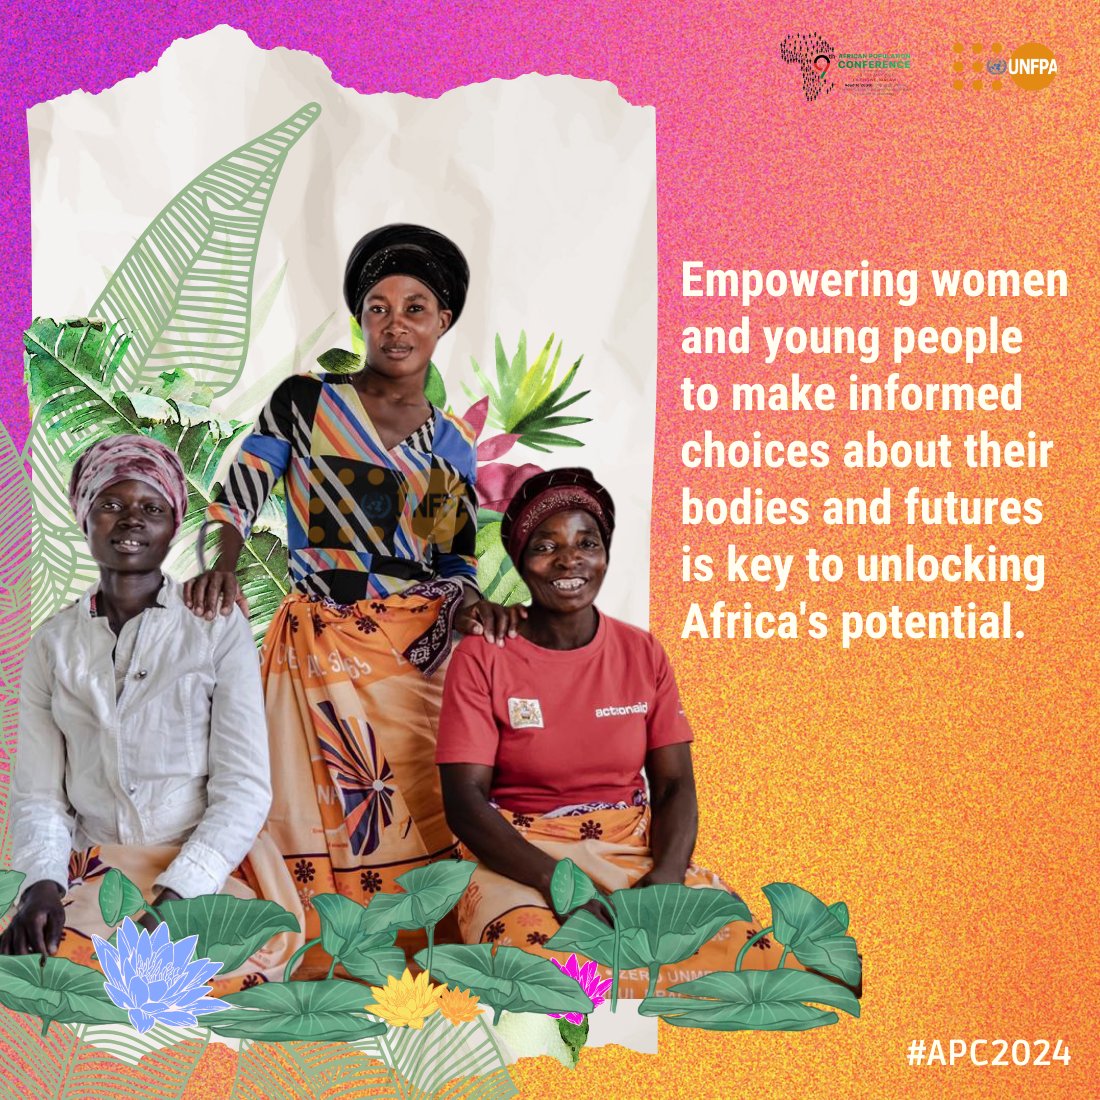 💪🏾 Empowering women and young people is key to achieving sustainable development in #Africa. See what else @UNFPA is advocating for at the 9th African Population Conference (#APC2024) taking place in #Malawi this week: unf.pa/sds #GlobalGoals